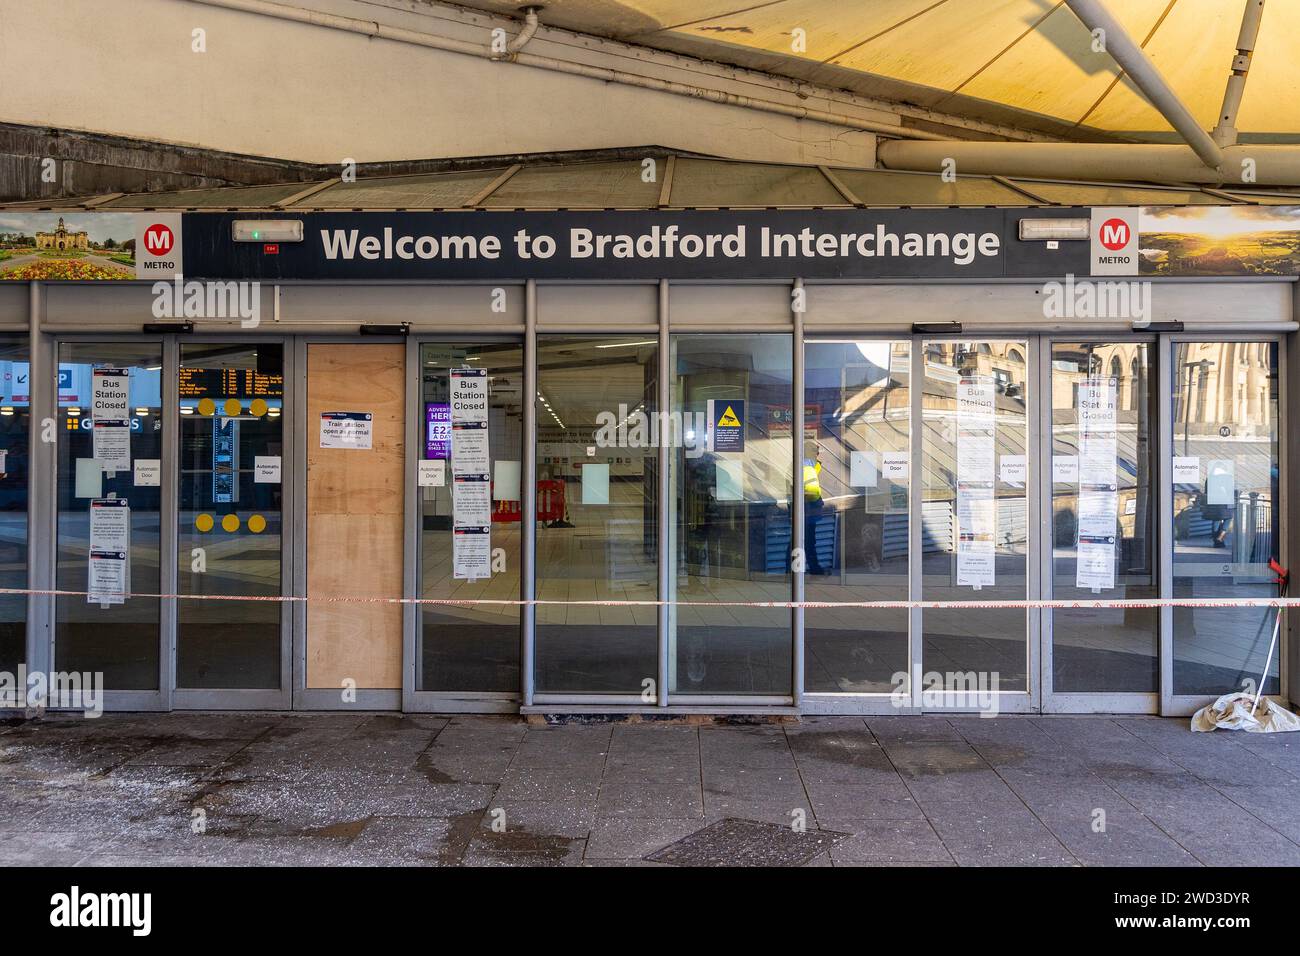 Bradford, UK, 18 January 2024, Bradford Interchange bus station remains closed following reports of damage on 04.01.2024. Caution tape and numerous notices making it clear Bradford Interchange bus station is closed. Credit: Neil Terry/ Neil Terry Photography Stock Photo